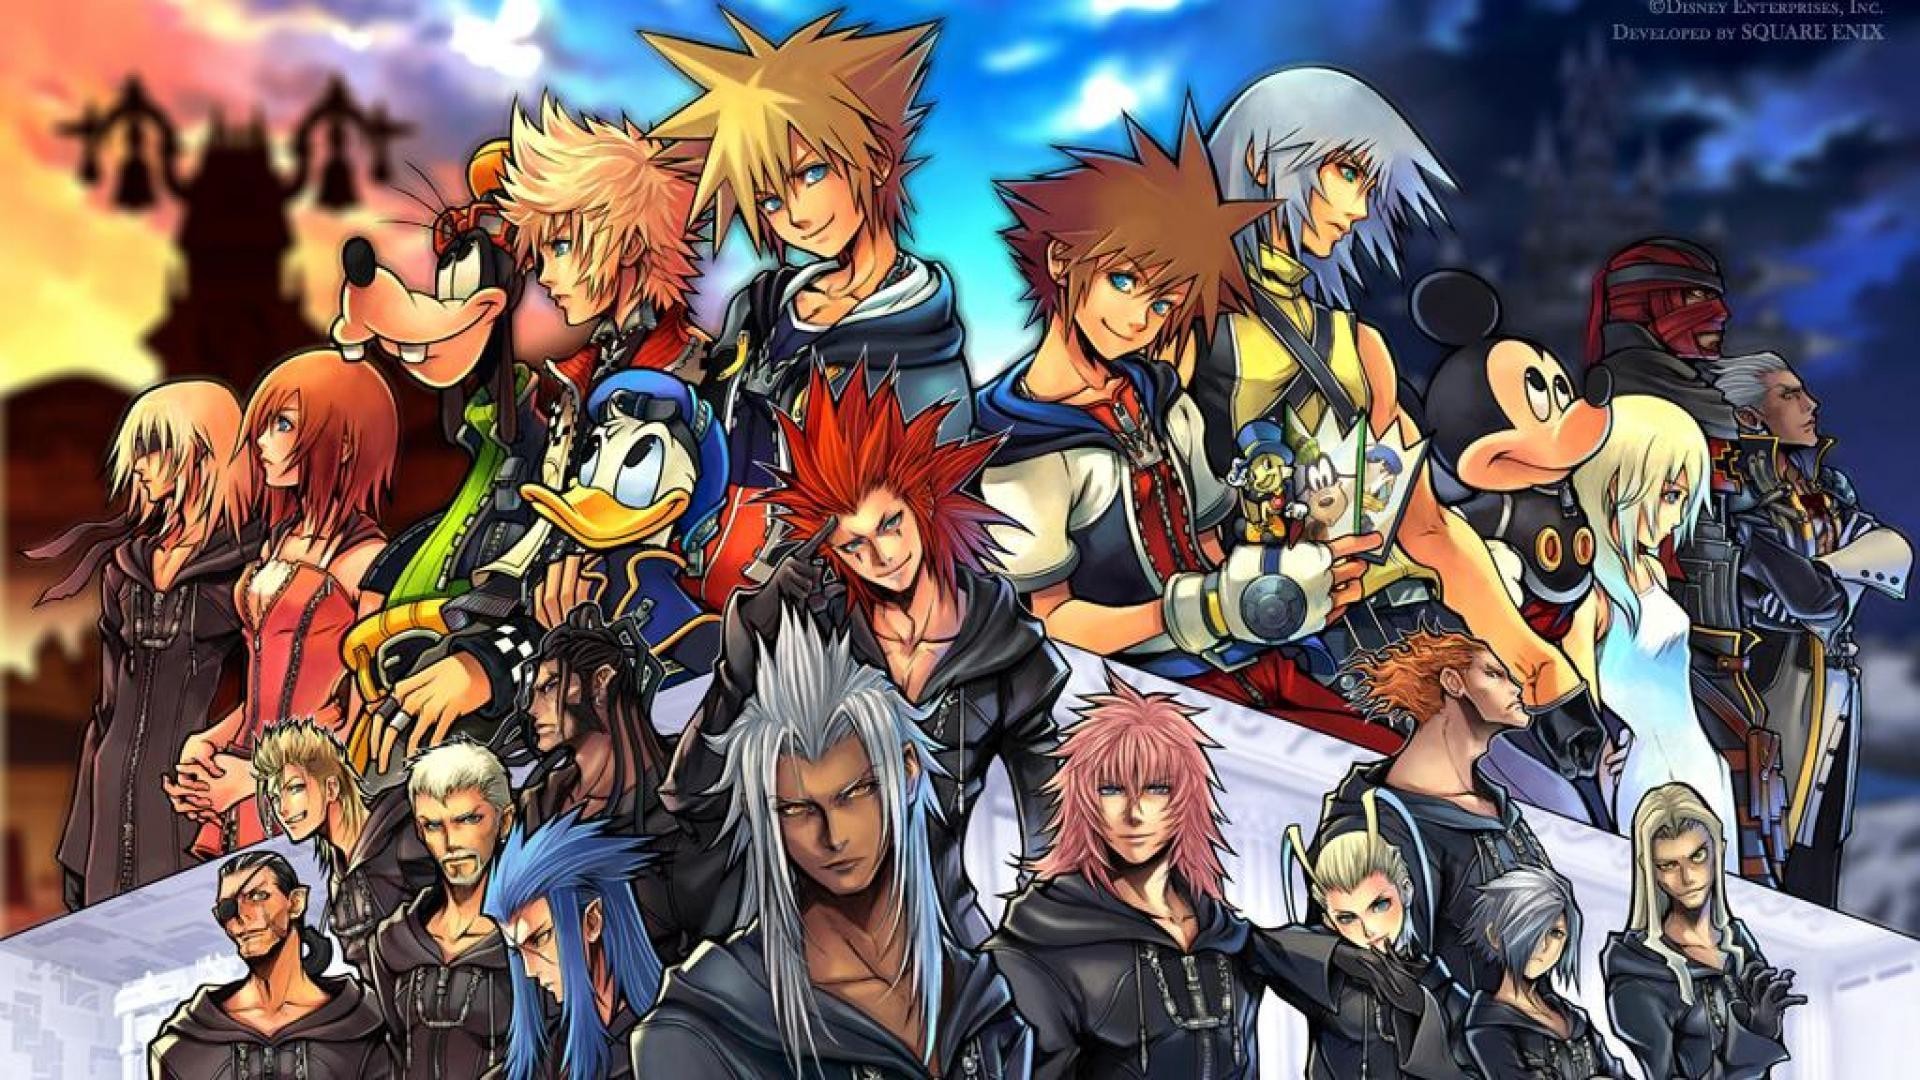 1920x1080 Wallpapers For > Kingdom Hearts Axel Wallpaper 